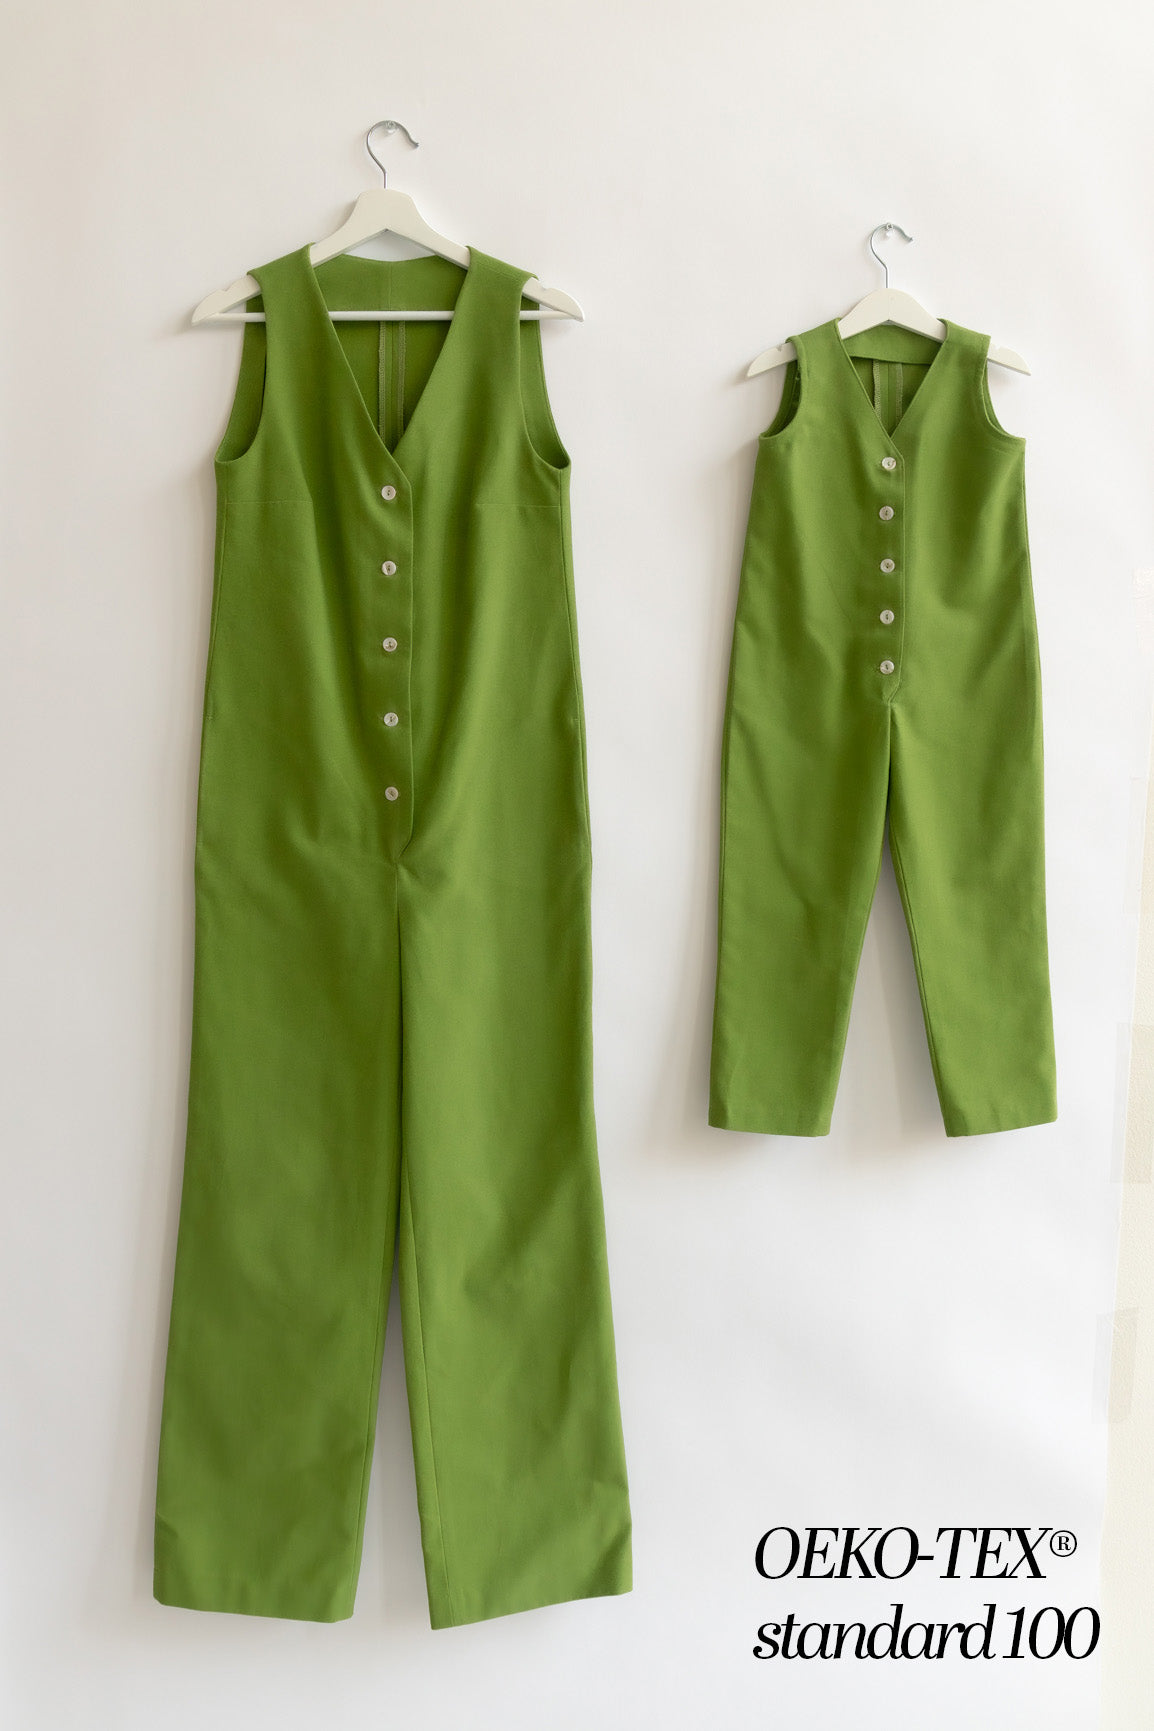 Green color Jumpsuit workwear cotton canvas with pockets 5 buttons v-neck tall girls short girls oeko-tex 